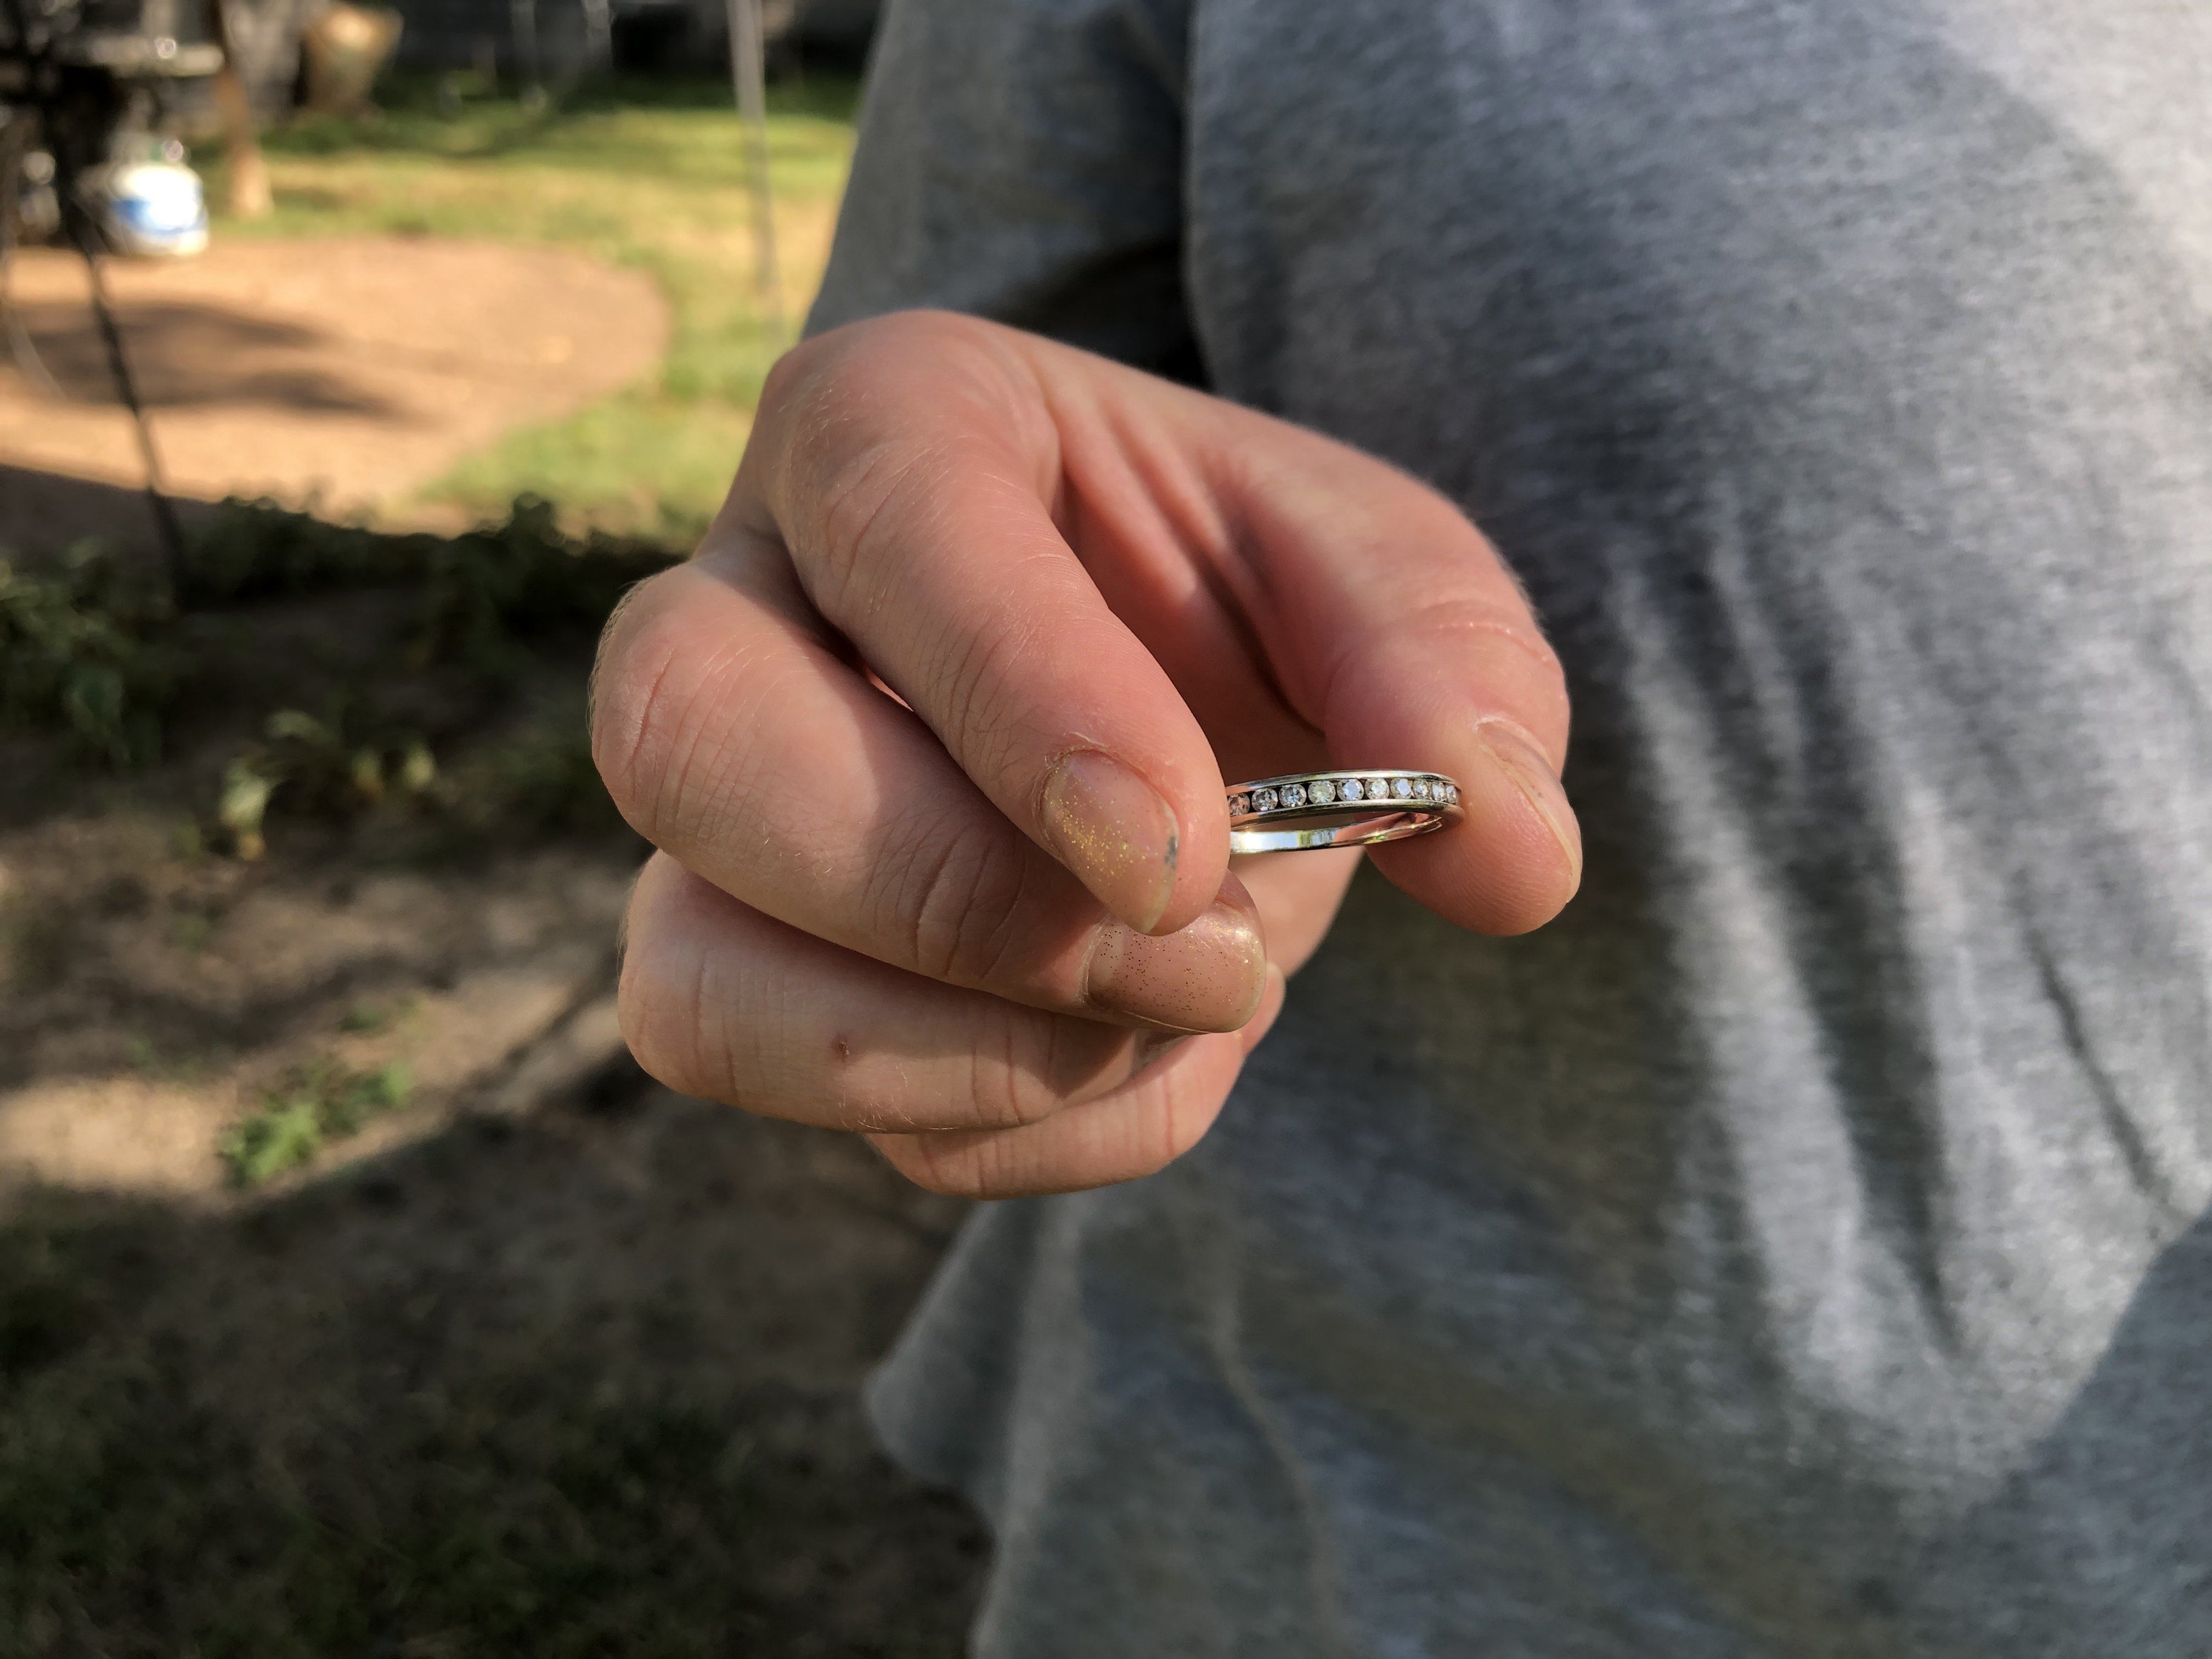 Small Gold Ring Found In Merriam, Kansas - Owners Very Happy